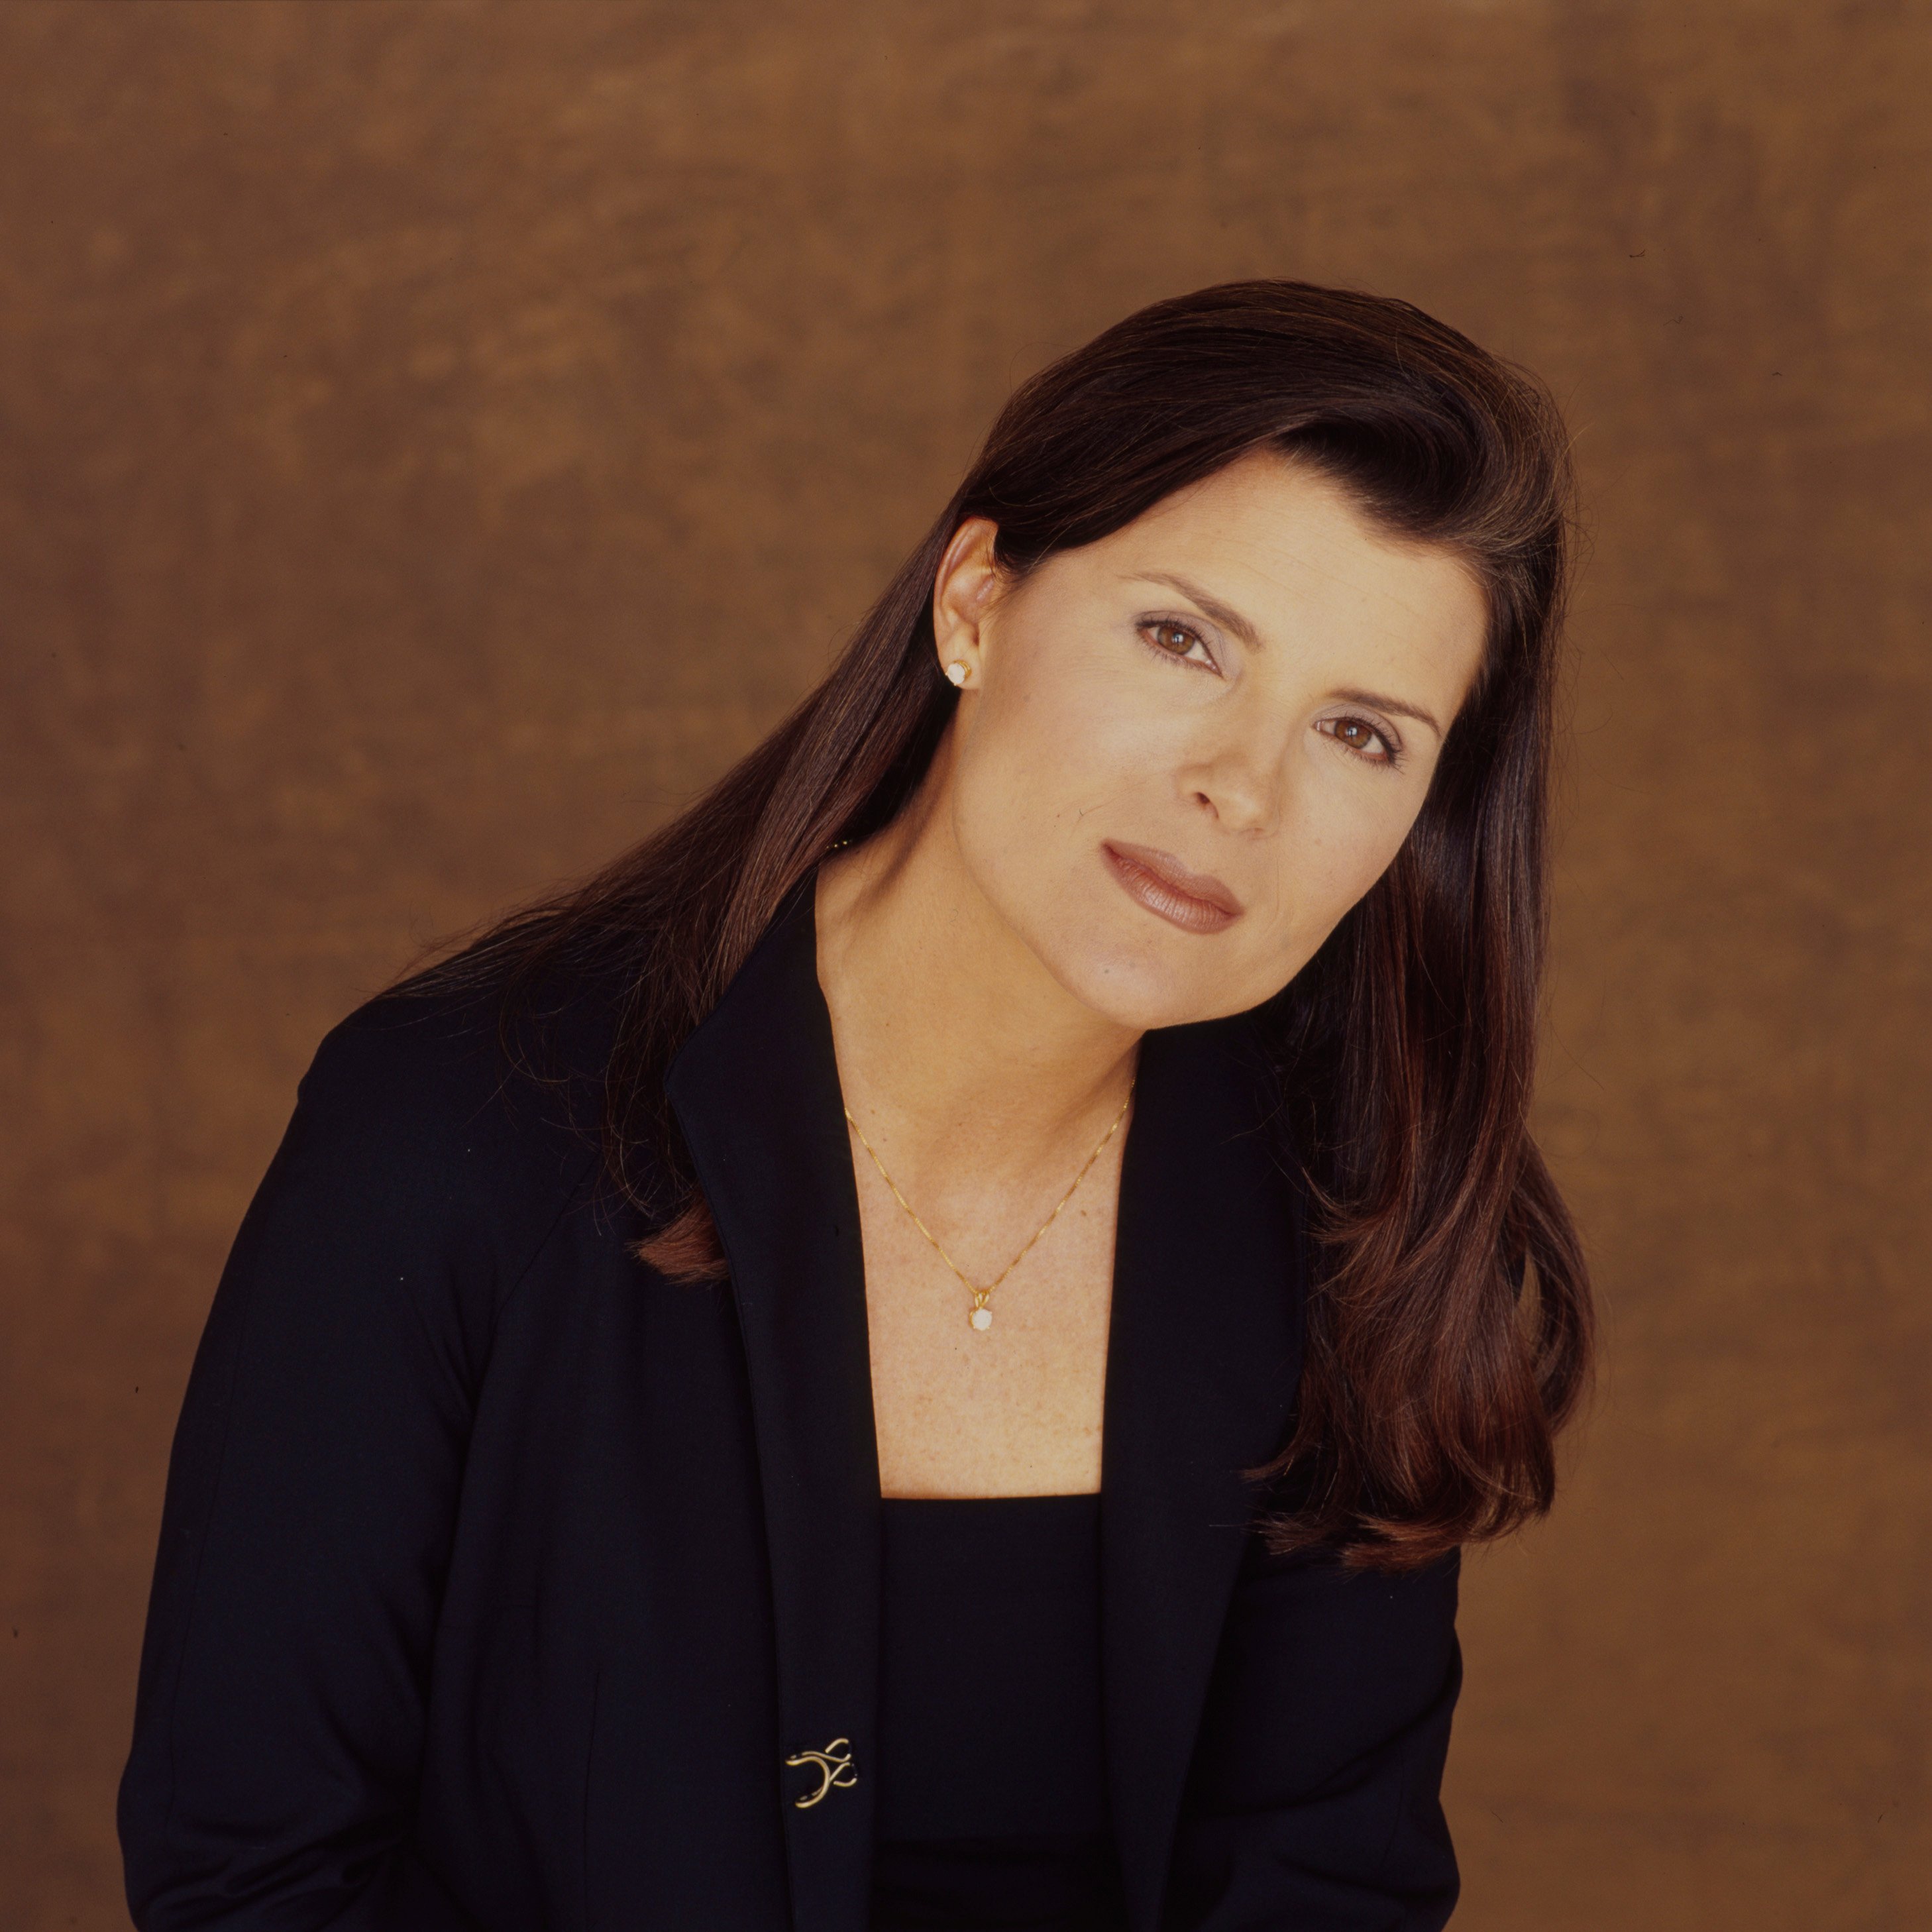 'The Bold and the Beautiful' star Kimberlin Brown in a navy blue suit, poses in front of a brown backdrop.